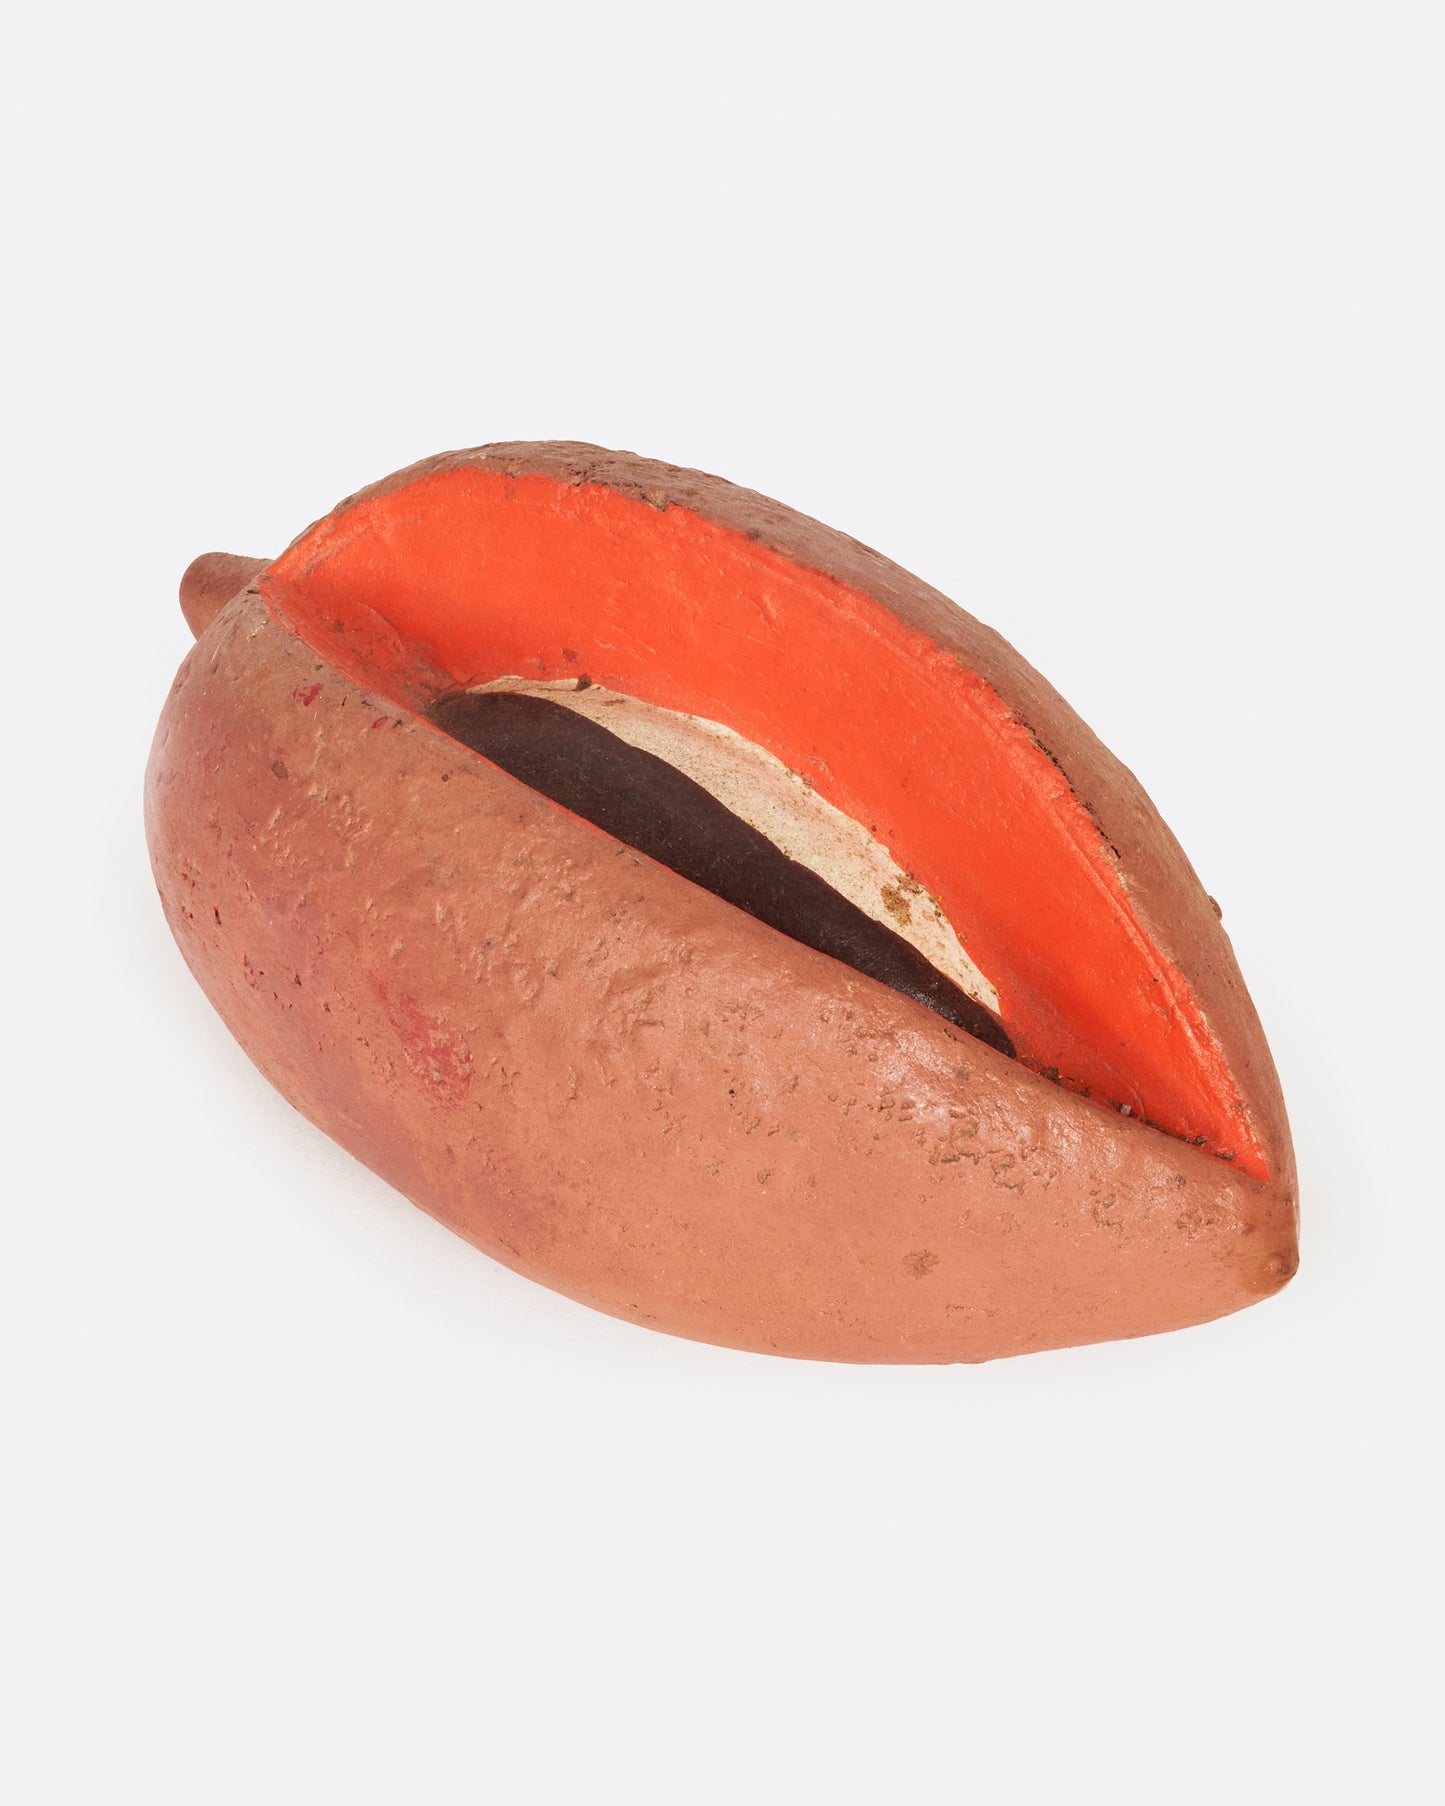 A vintage handmade mamey bank from 1940's Mexico.